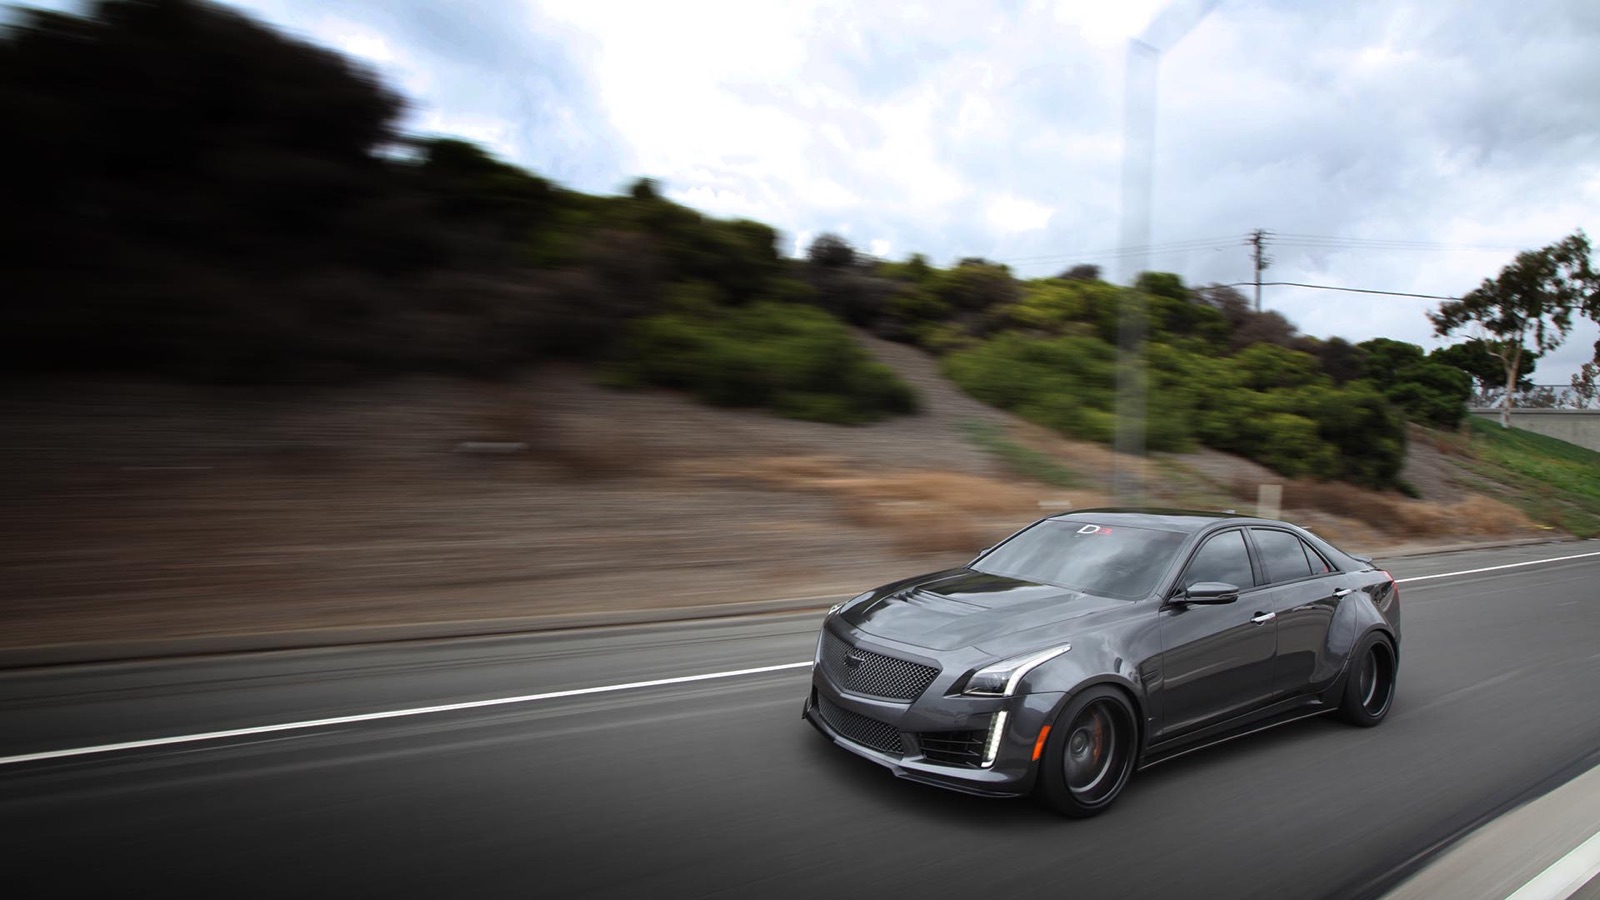 2016 D3 Cadillac CTS-V Widebody Pictures.